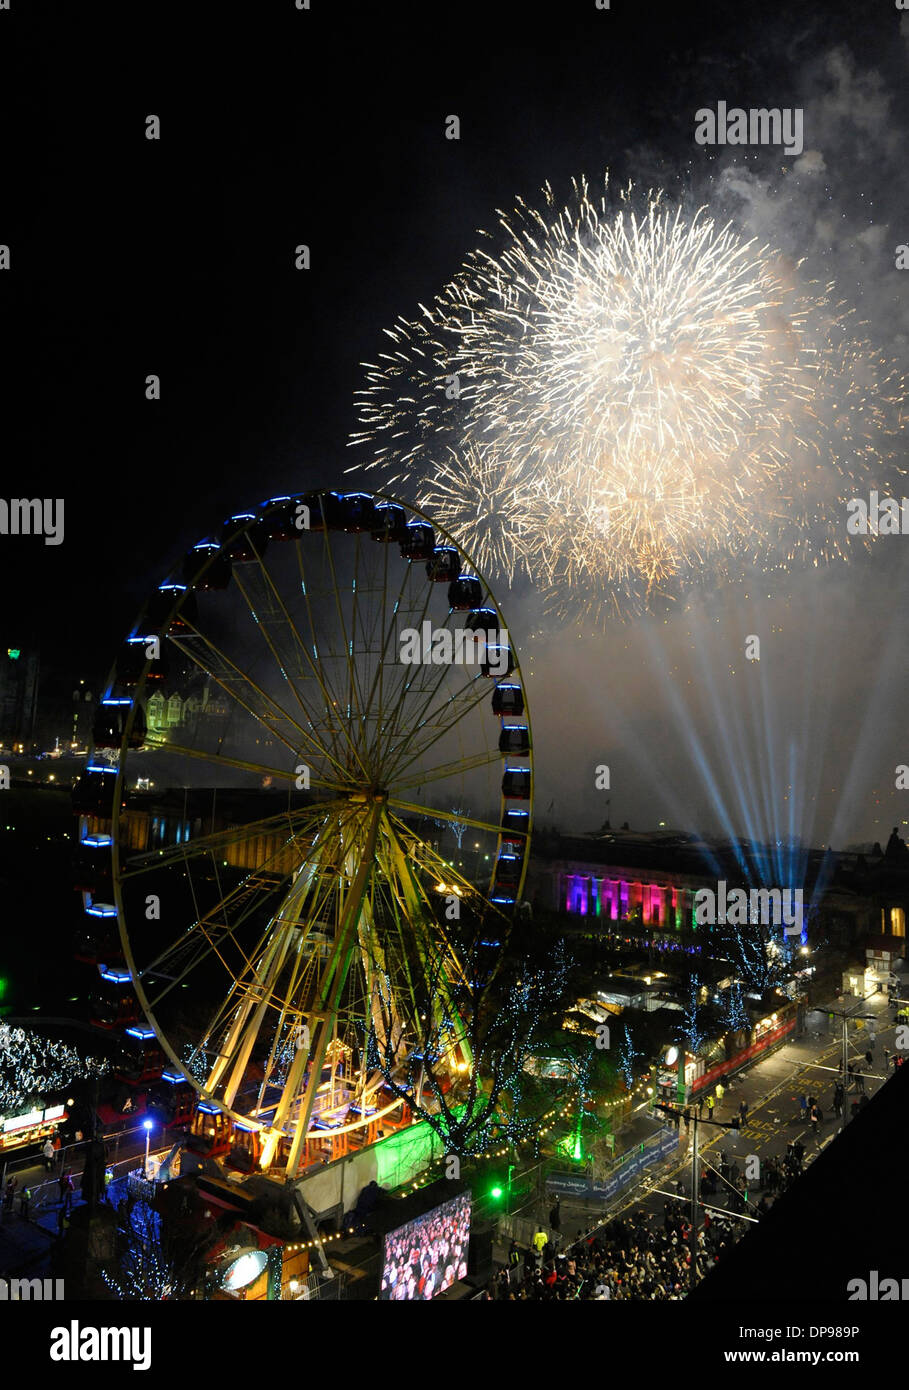 Up to 80,000 people are in Princes Street, Edinburgh, Scotland (31 Dec) as part of the Hogmanay Celebrations 2014. Stock Photo